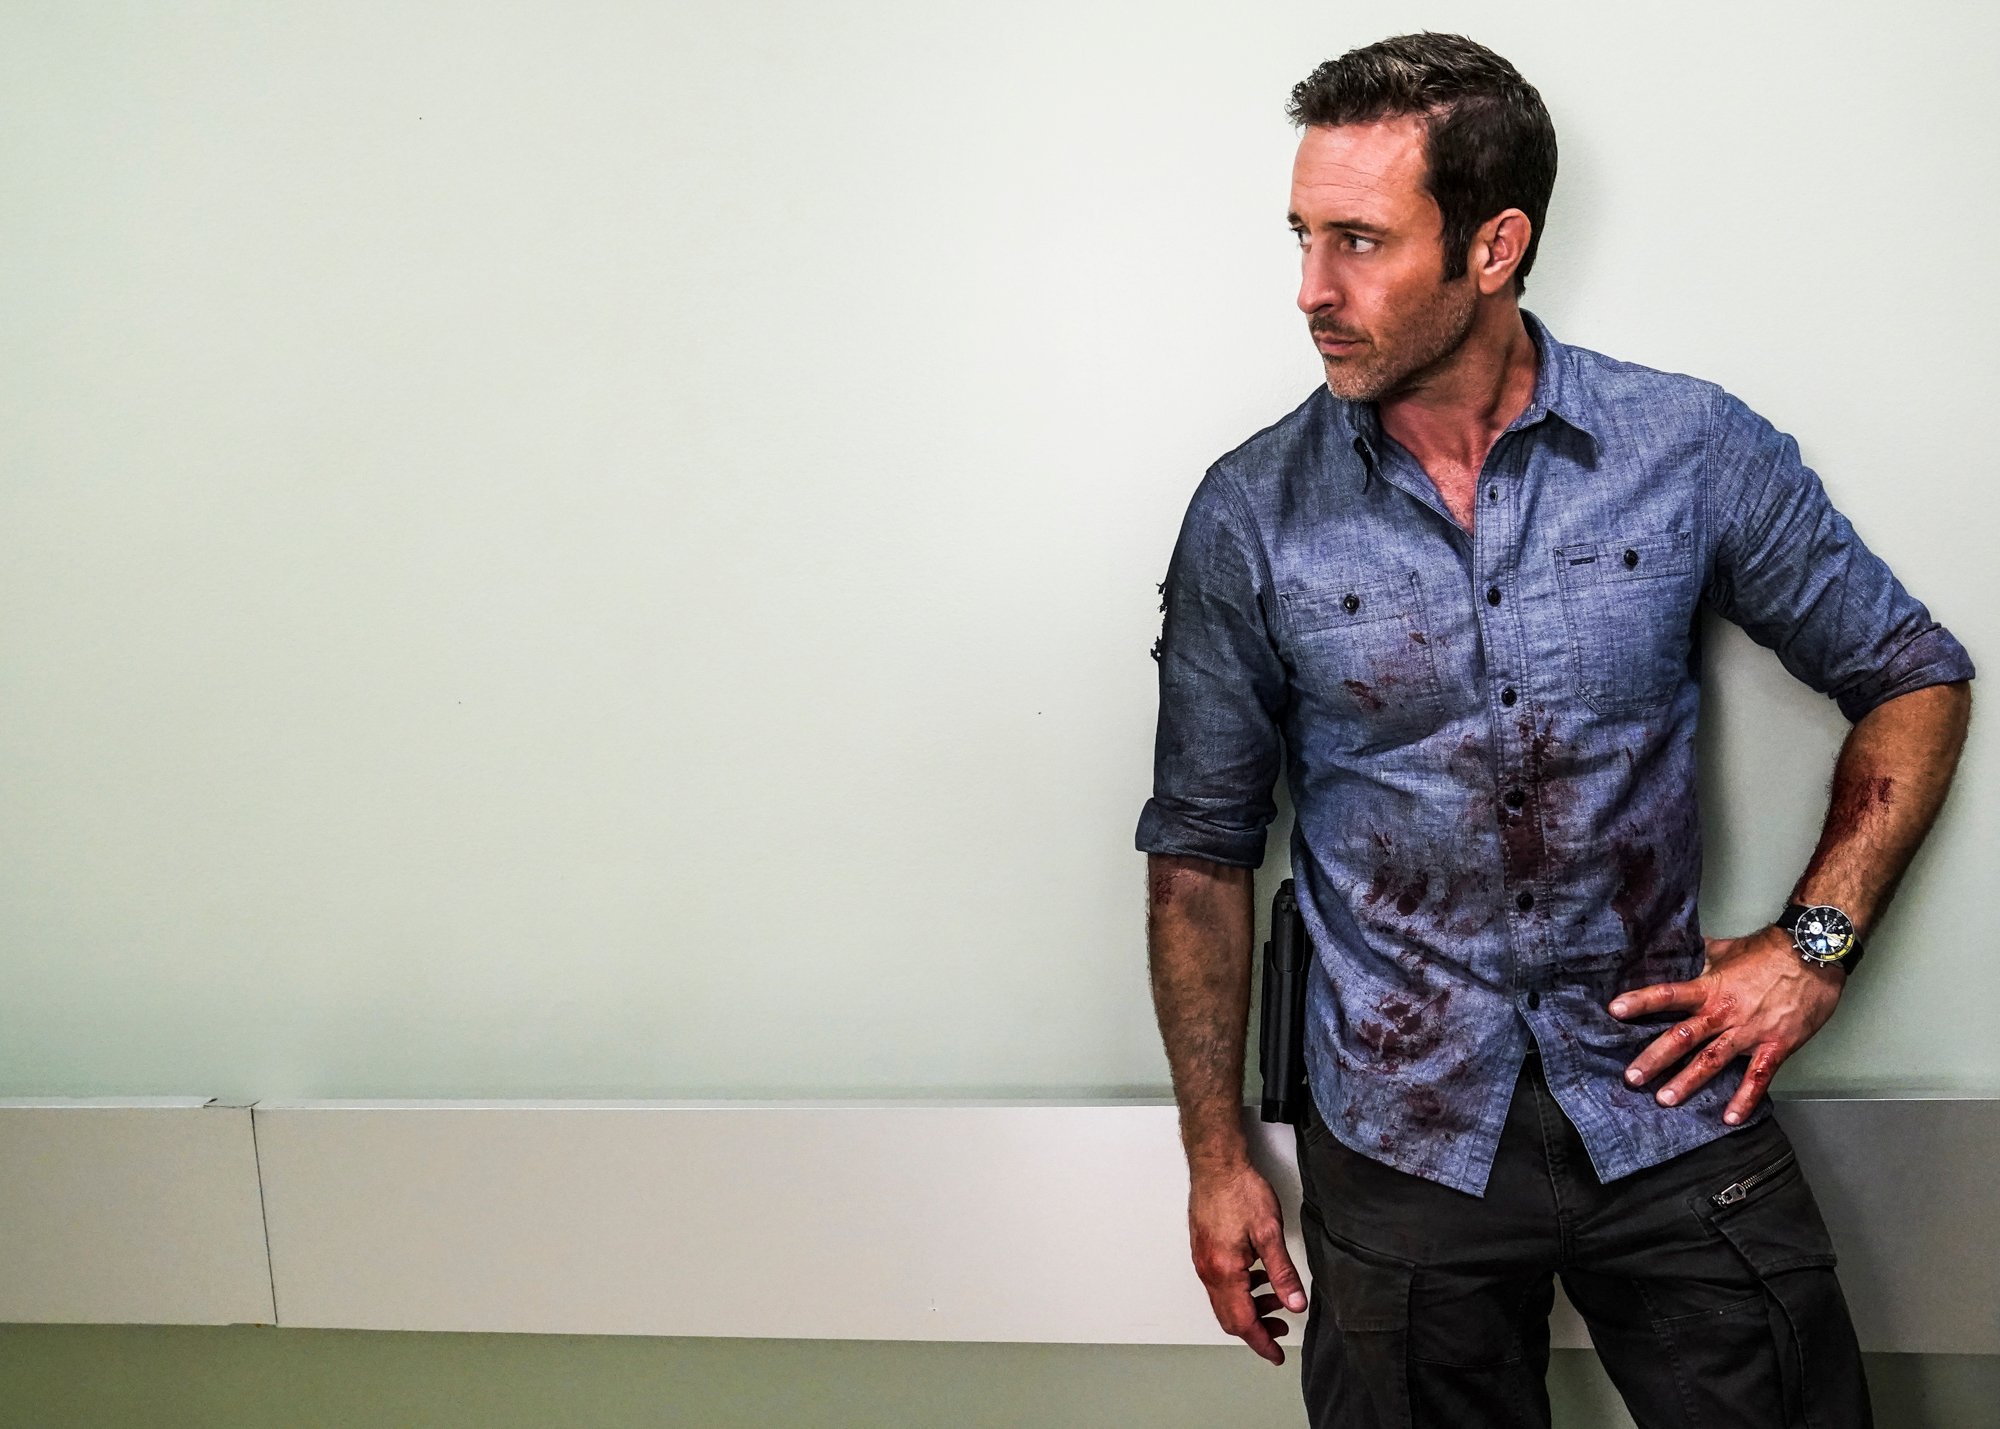 Hawaii Five-0: Alex O'Loughlin stands with his hands on his hip